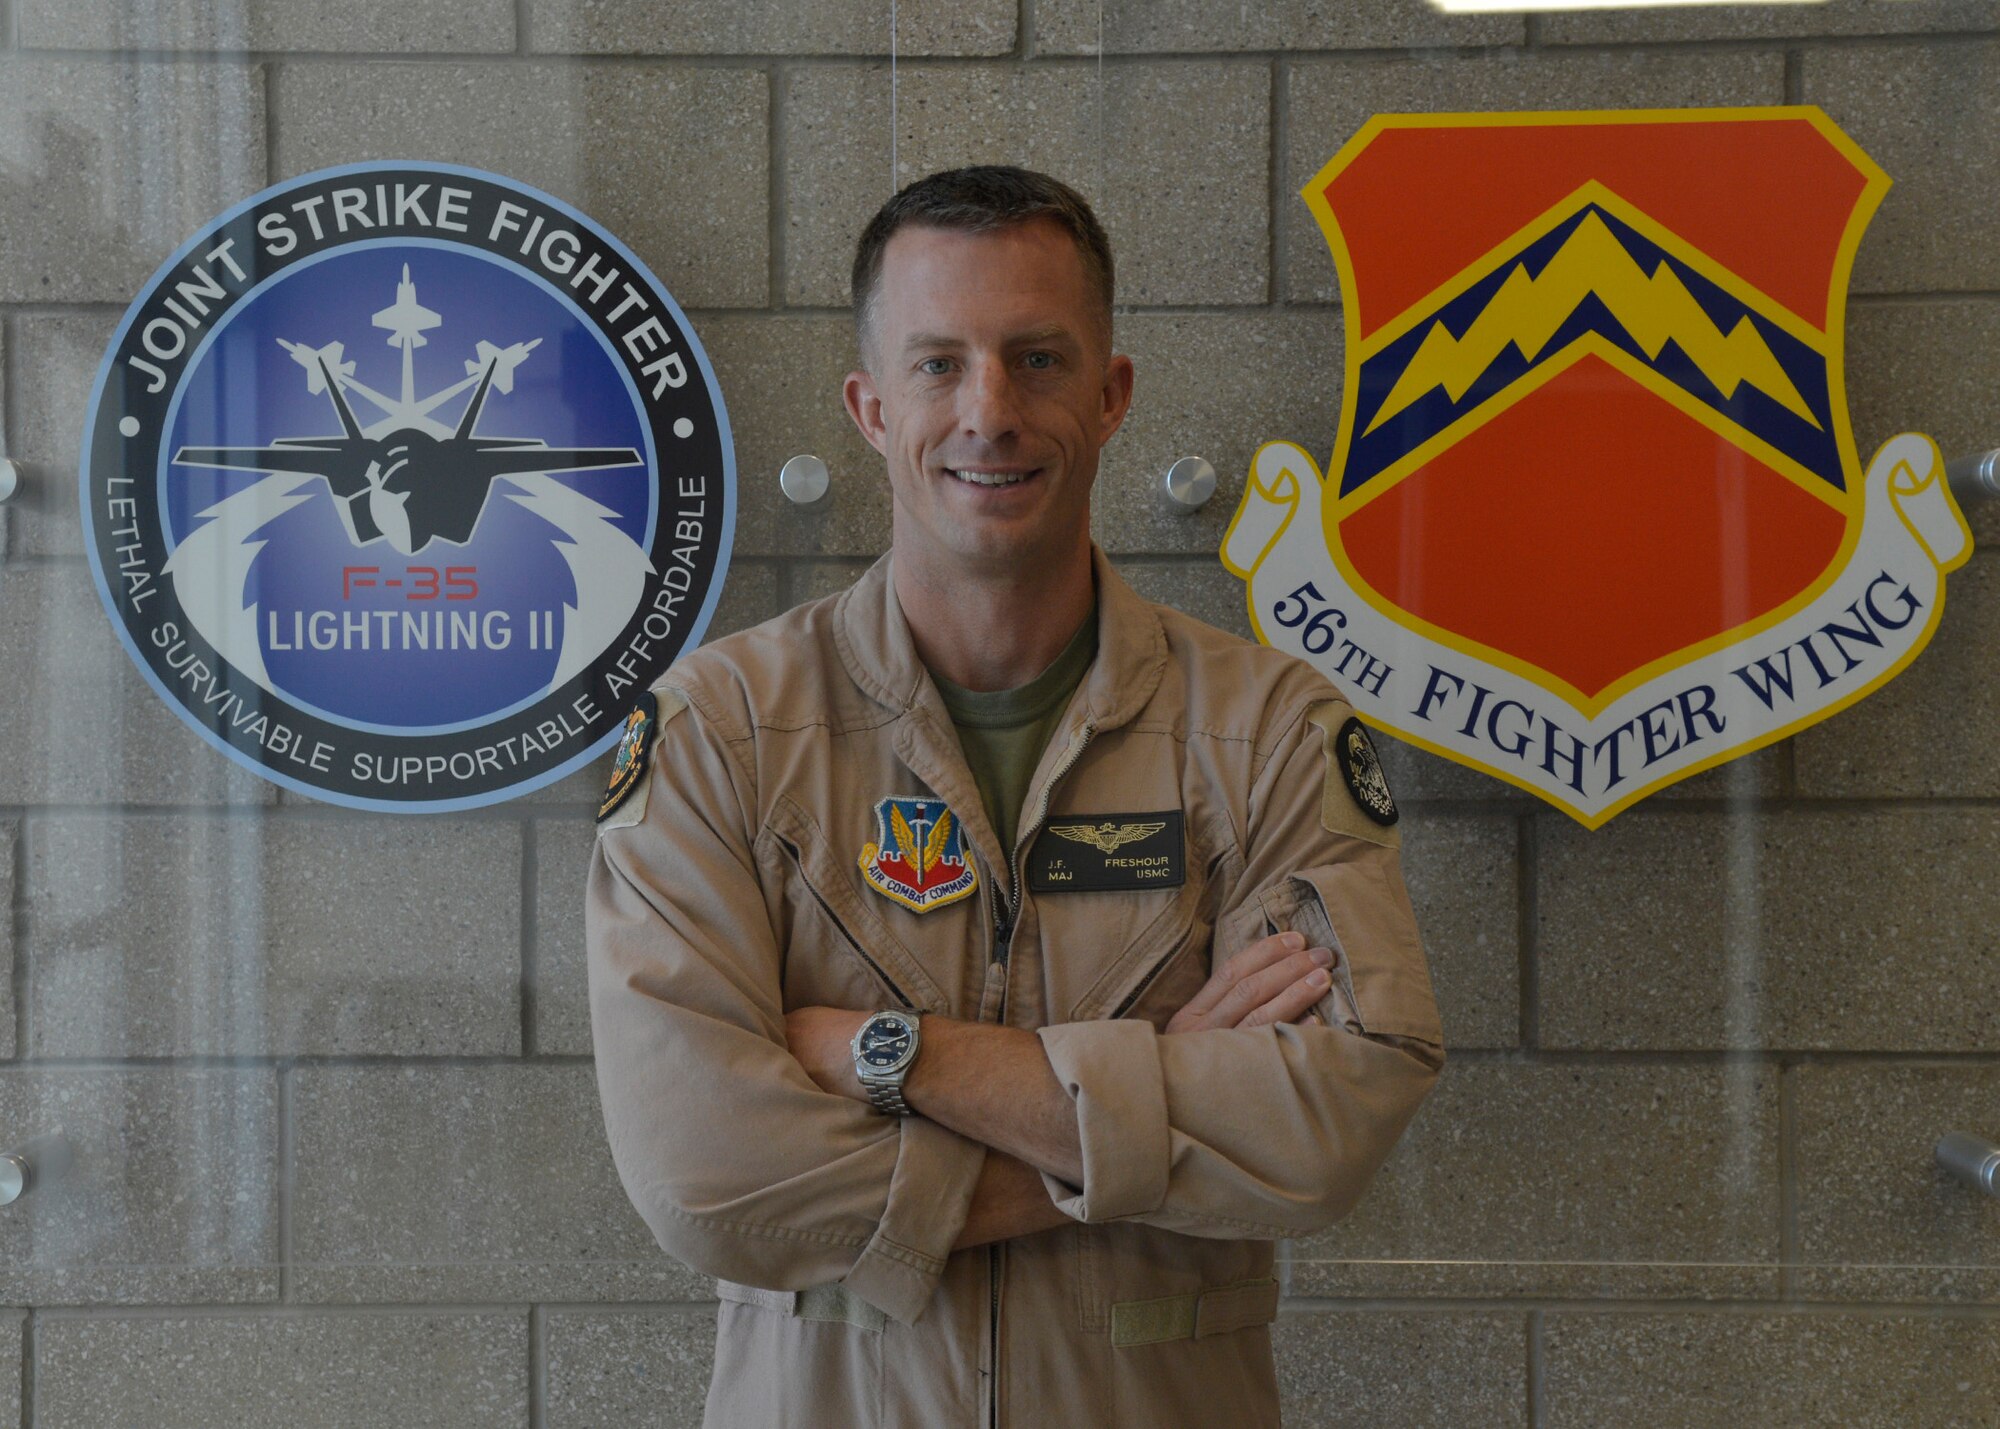 Maj. Joseph Freshour, Marine Corps pilot, is the first Marine aviator selected for the F-35 Air Force Exchange in Operational Test here at Luke Air Force Base, Ariz., Oct. 7, 2015. Freshour will be part of the 61st Fighter Squadron for three and a half months at which point he will head to Nellis AFB, Nevada, to continue training with the F-35 for another two and a half years. 
(U.S. Air Force photo by Senior Airman Devante Williams)